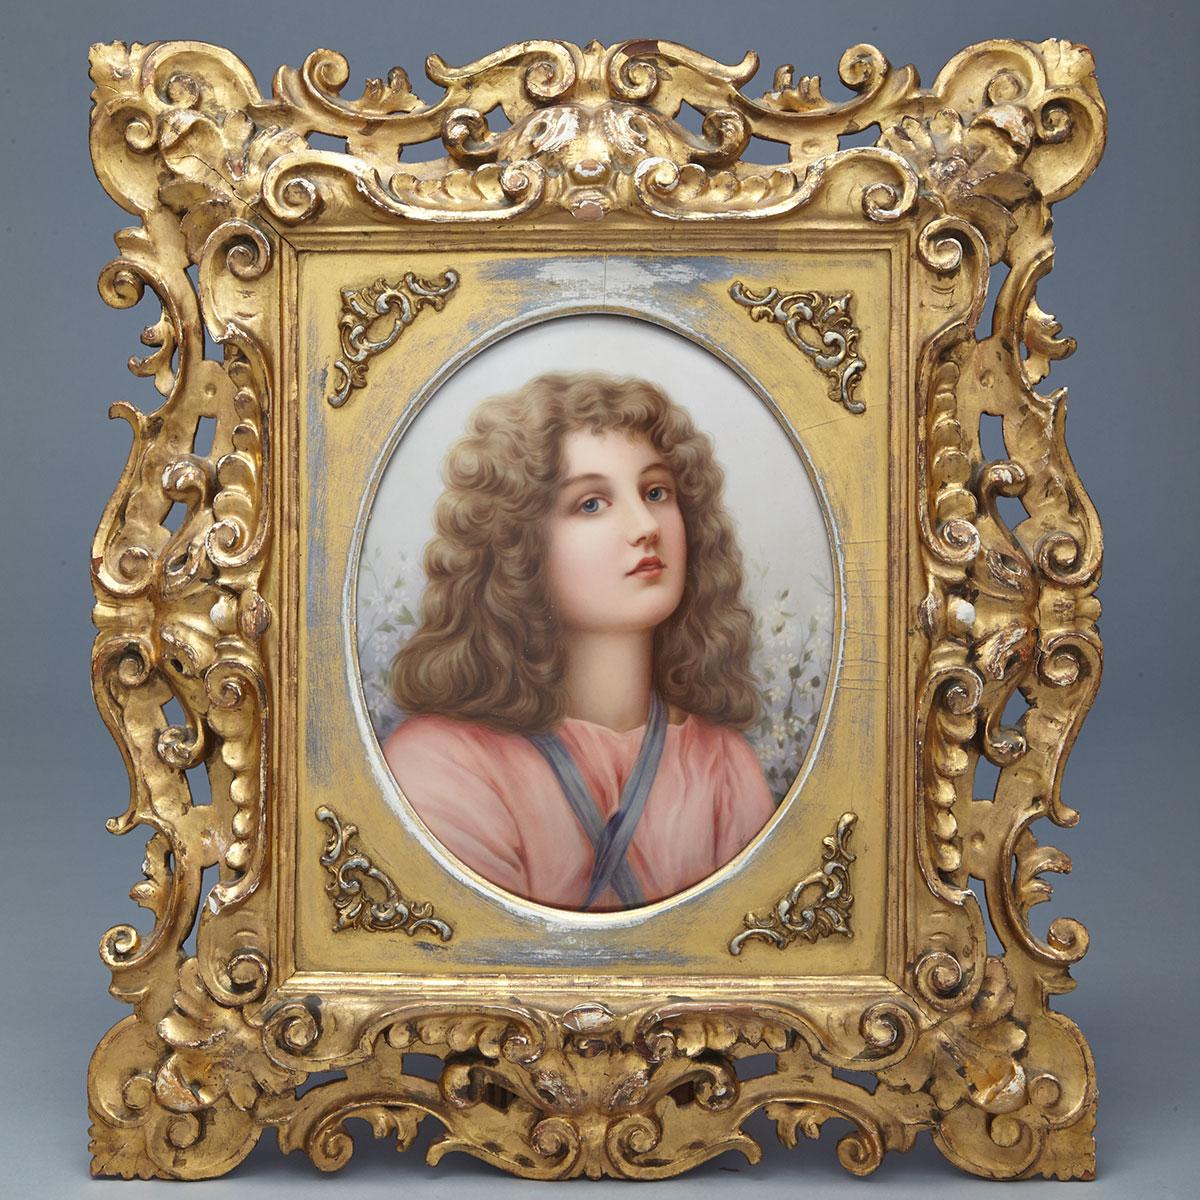 Berlin Oval Portrait Plaque, ‘Spring’, late 19th century